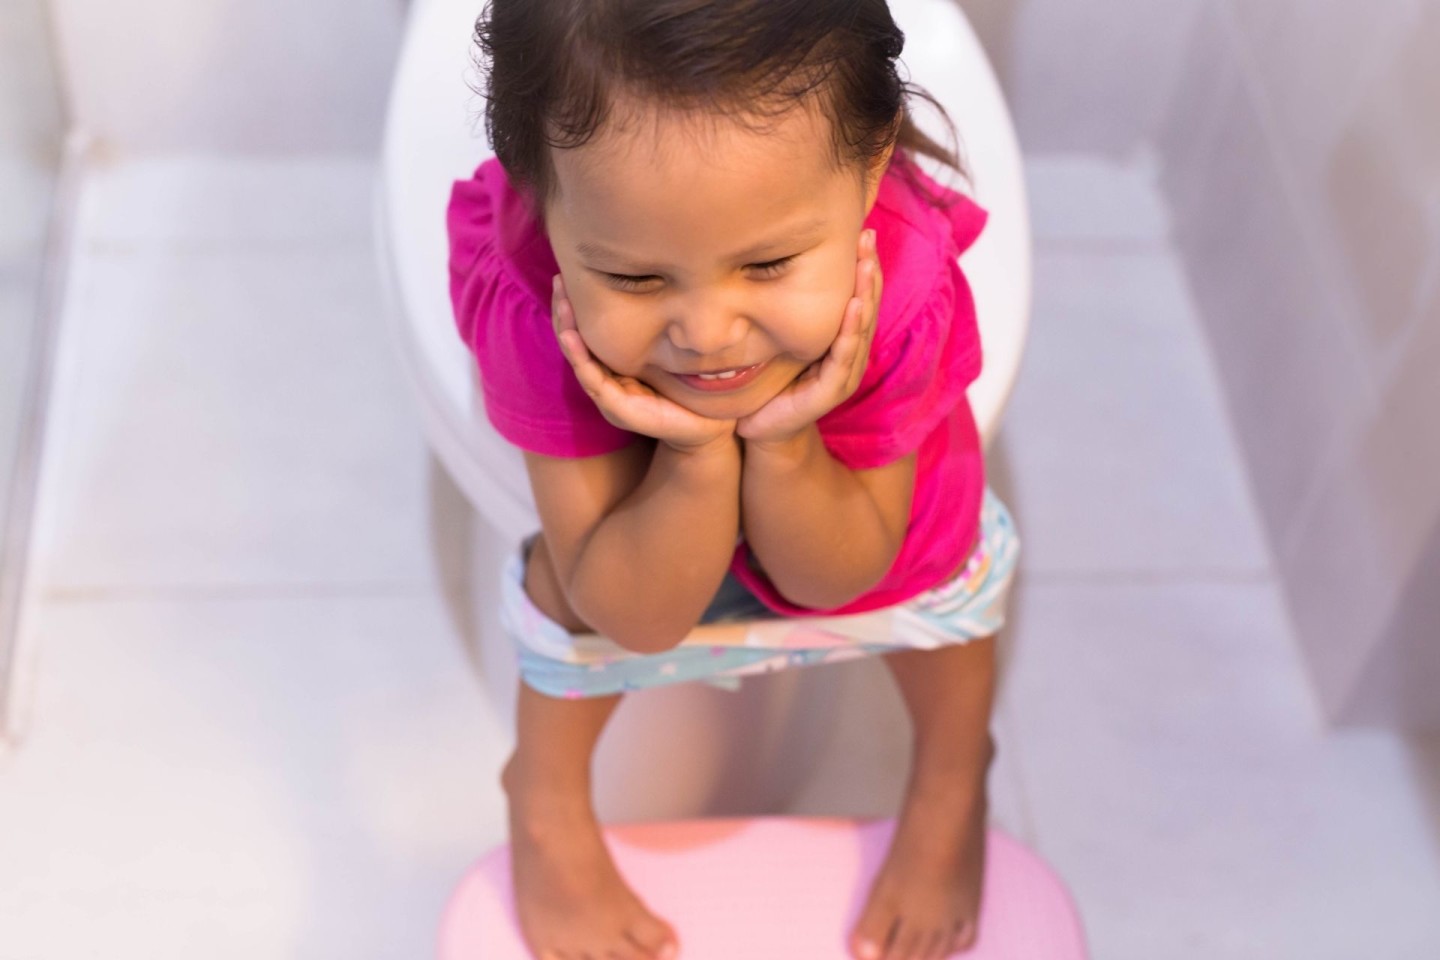 How to make toddler poop instantly: Toddler smiling while sitting on potty